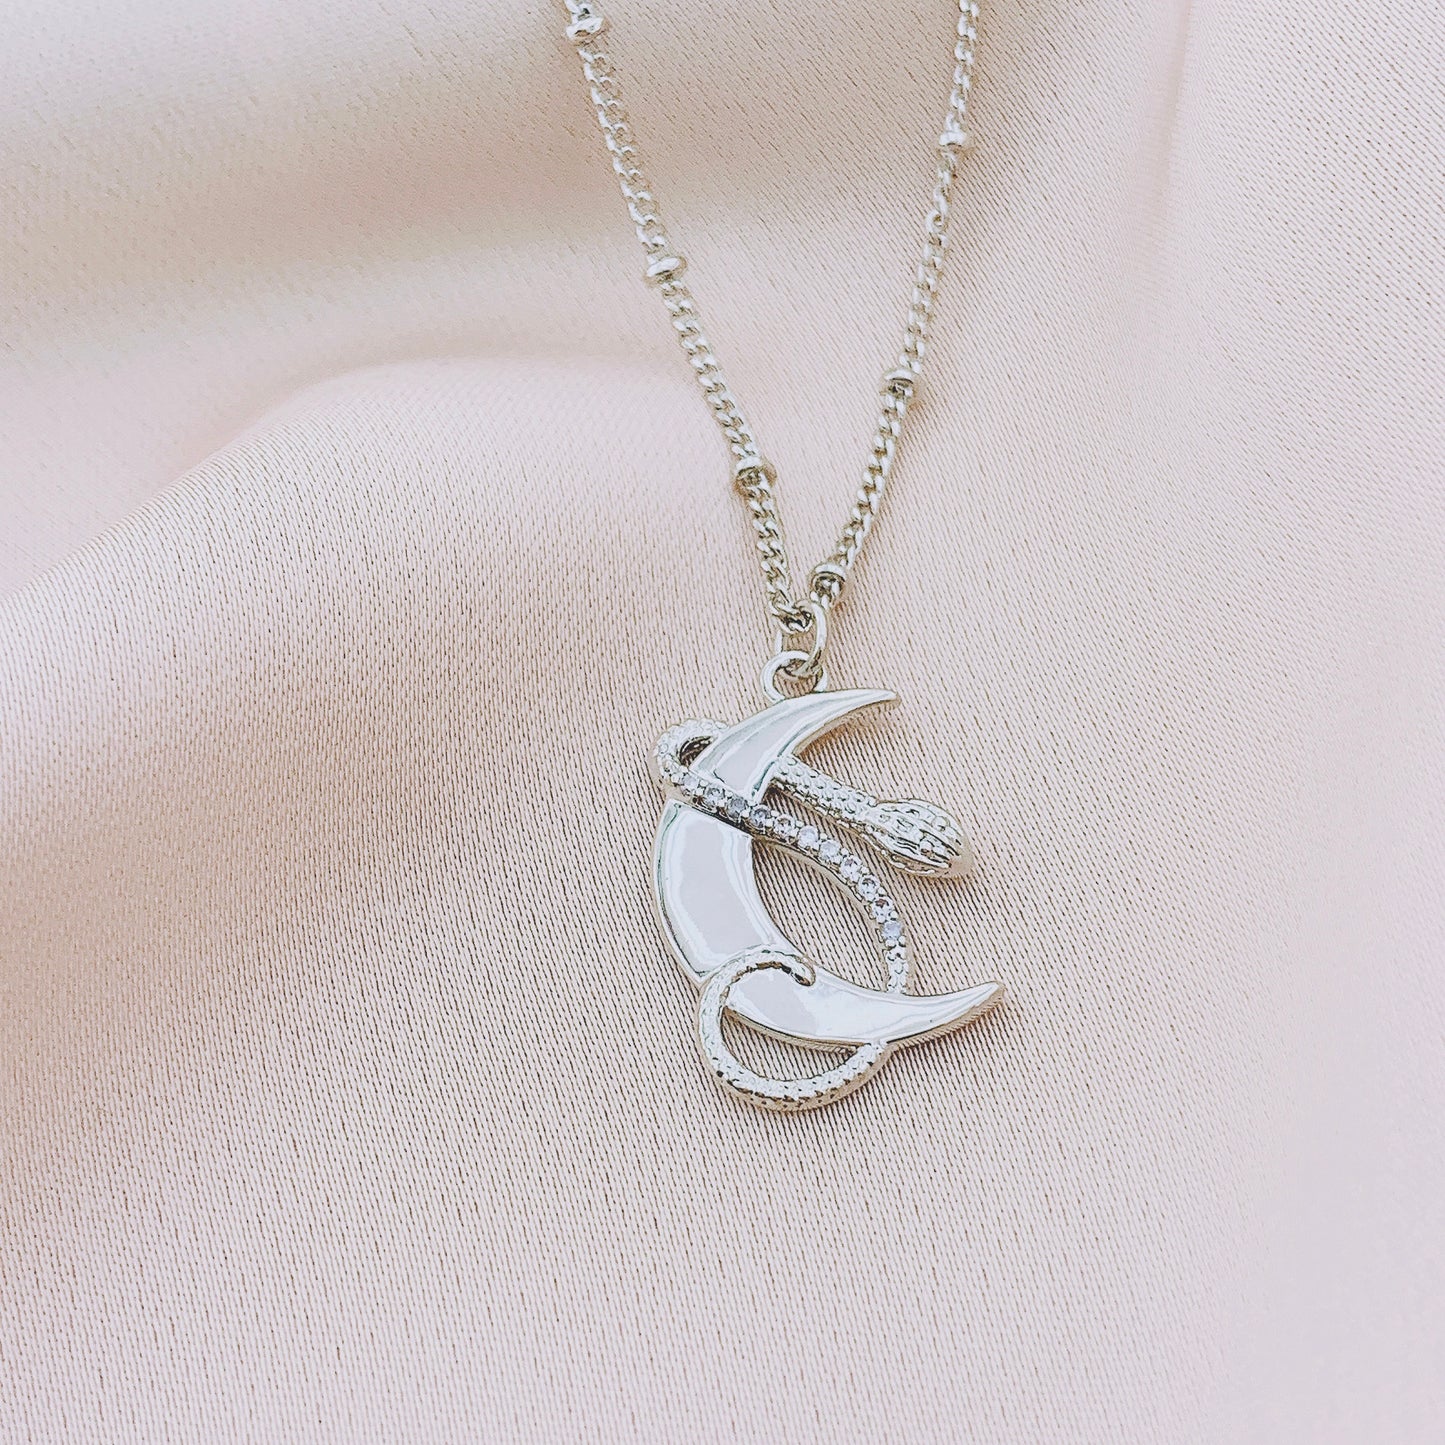 Women's Snake Crescent Moon Necklace